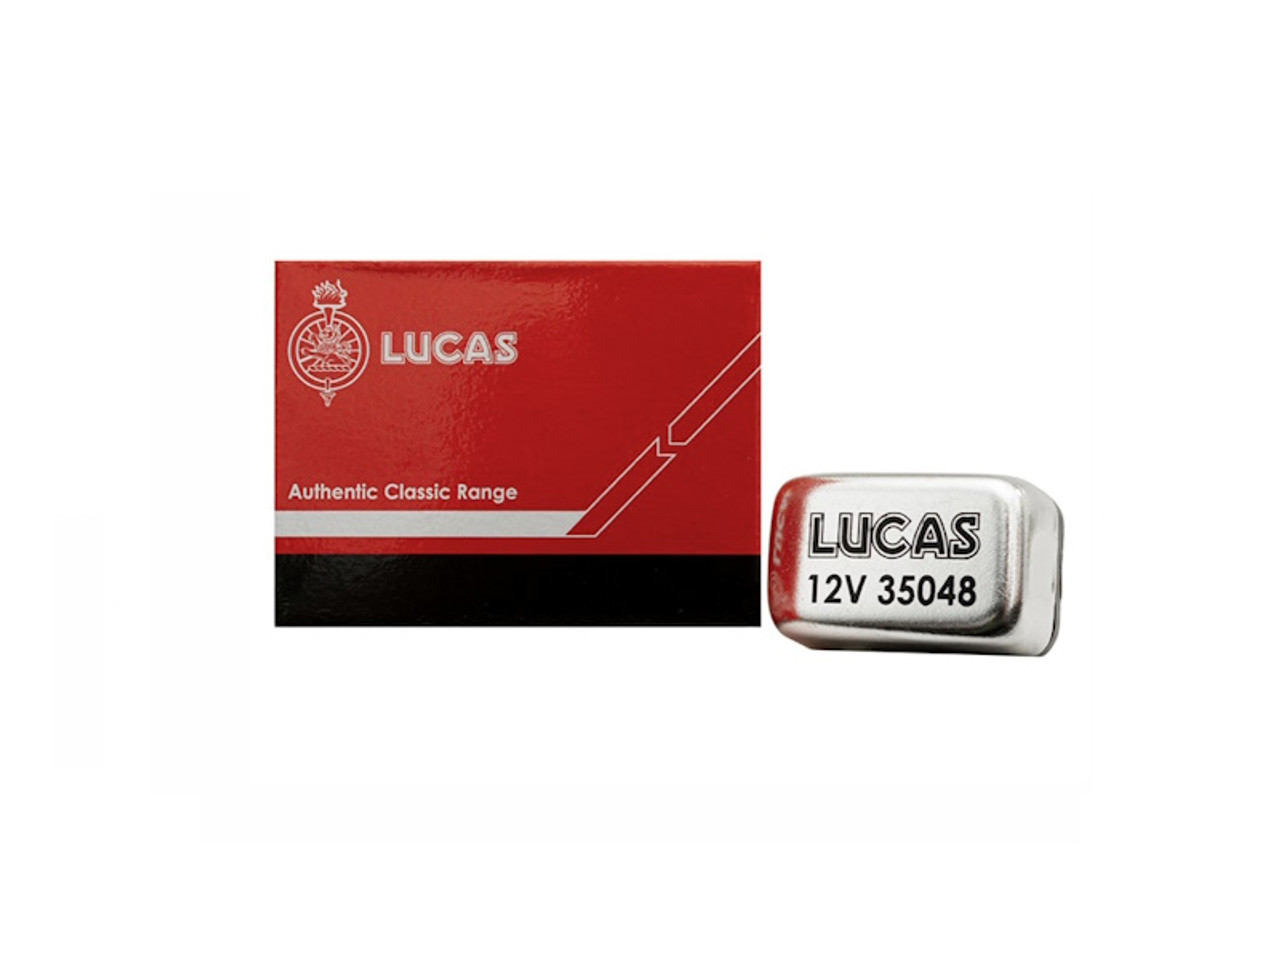 Lucas Defender and Series 3 2 Pin Indicator Relay - STC4793